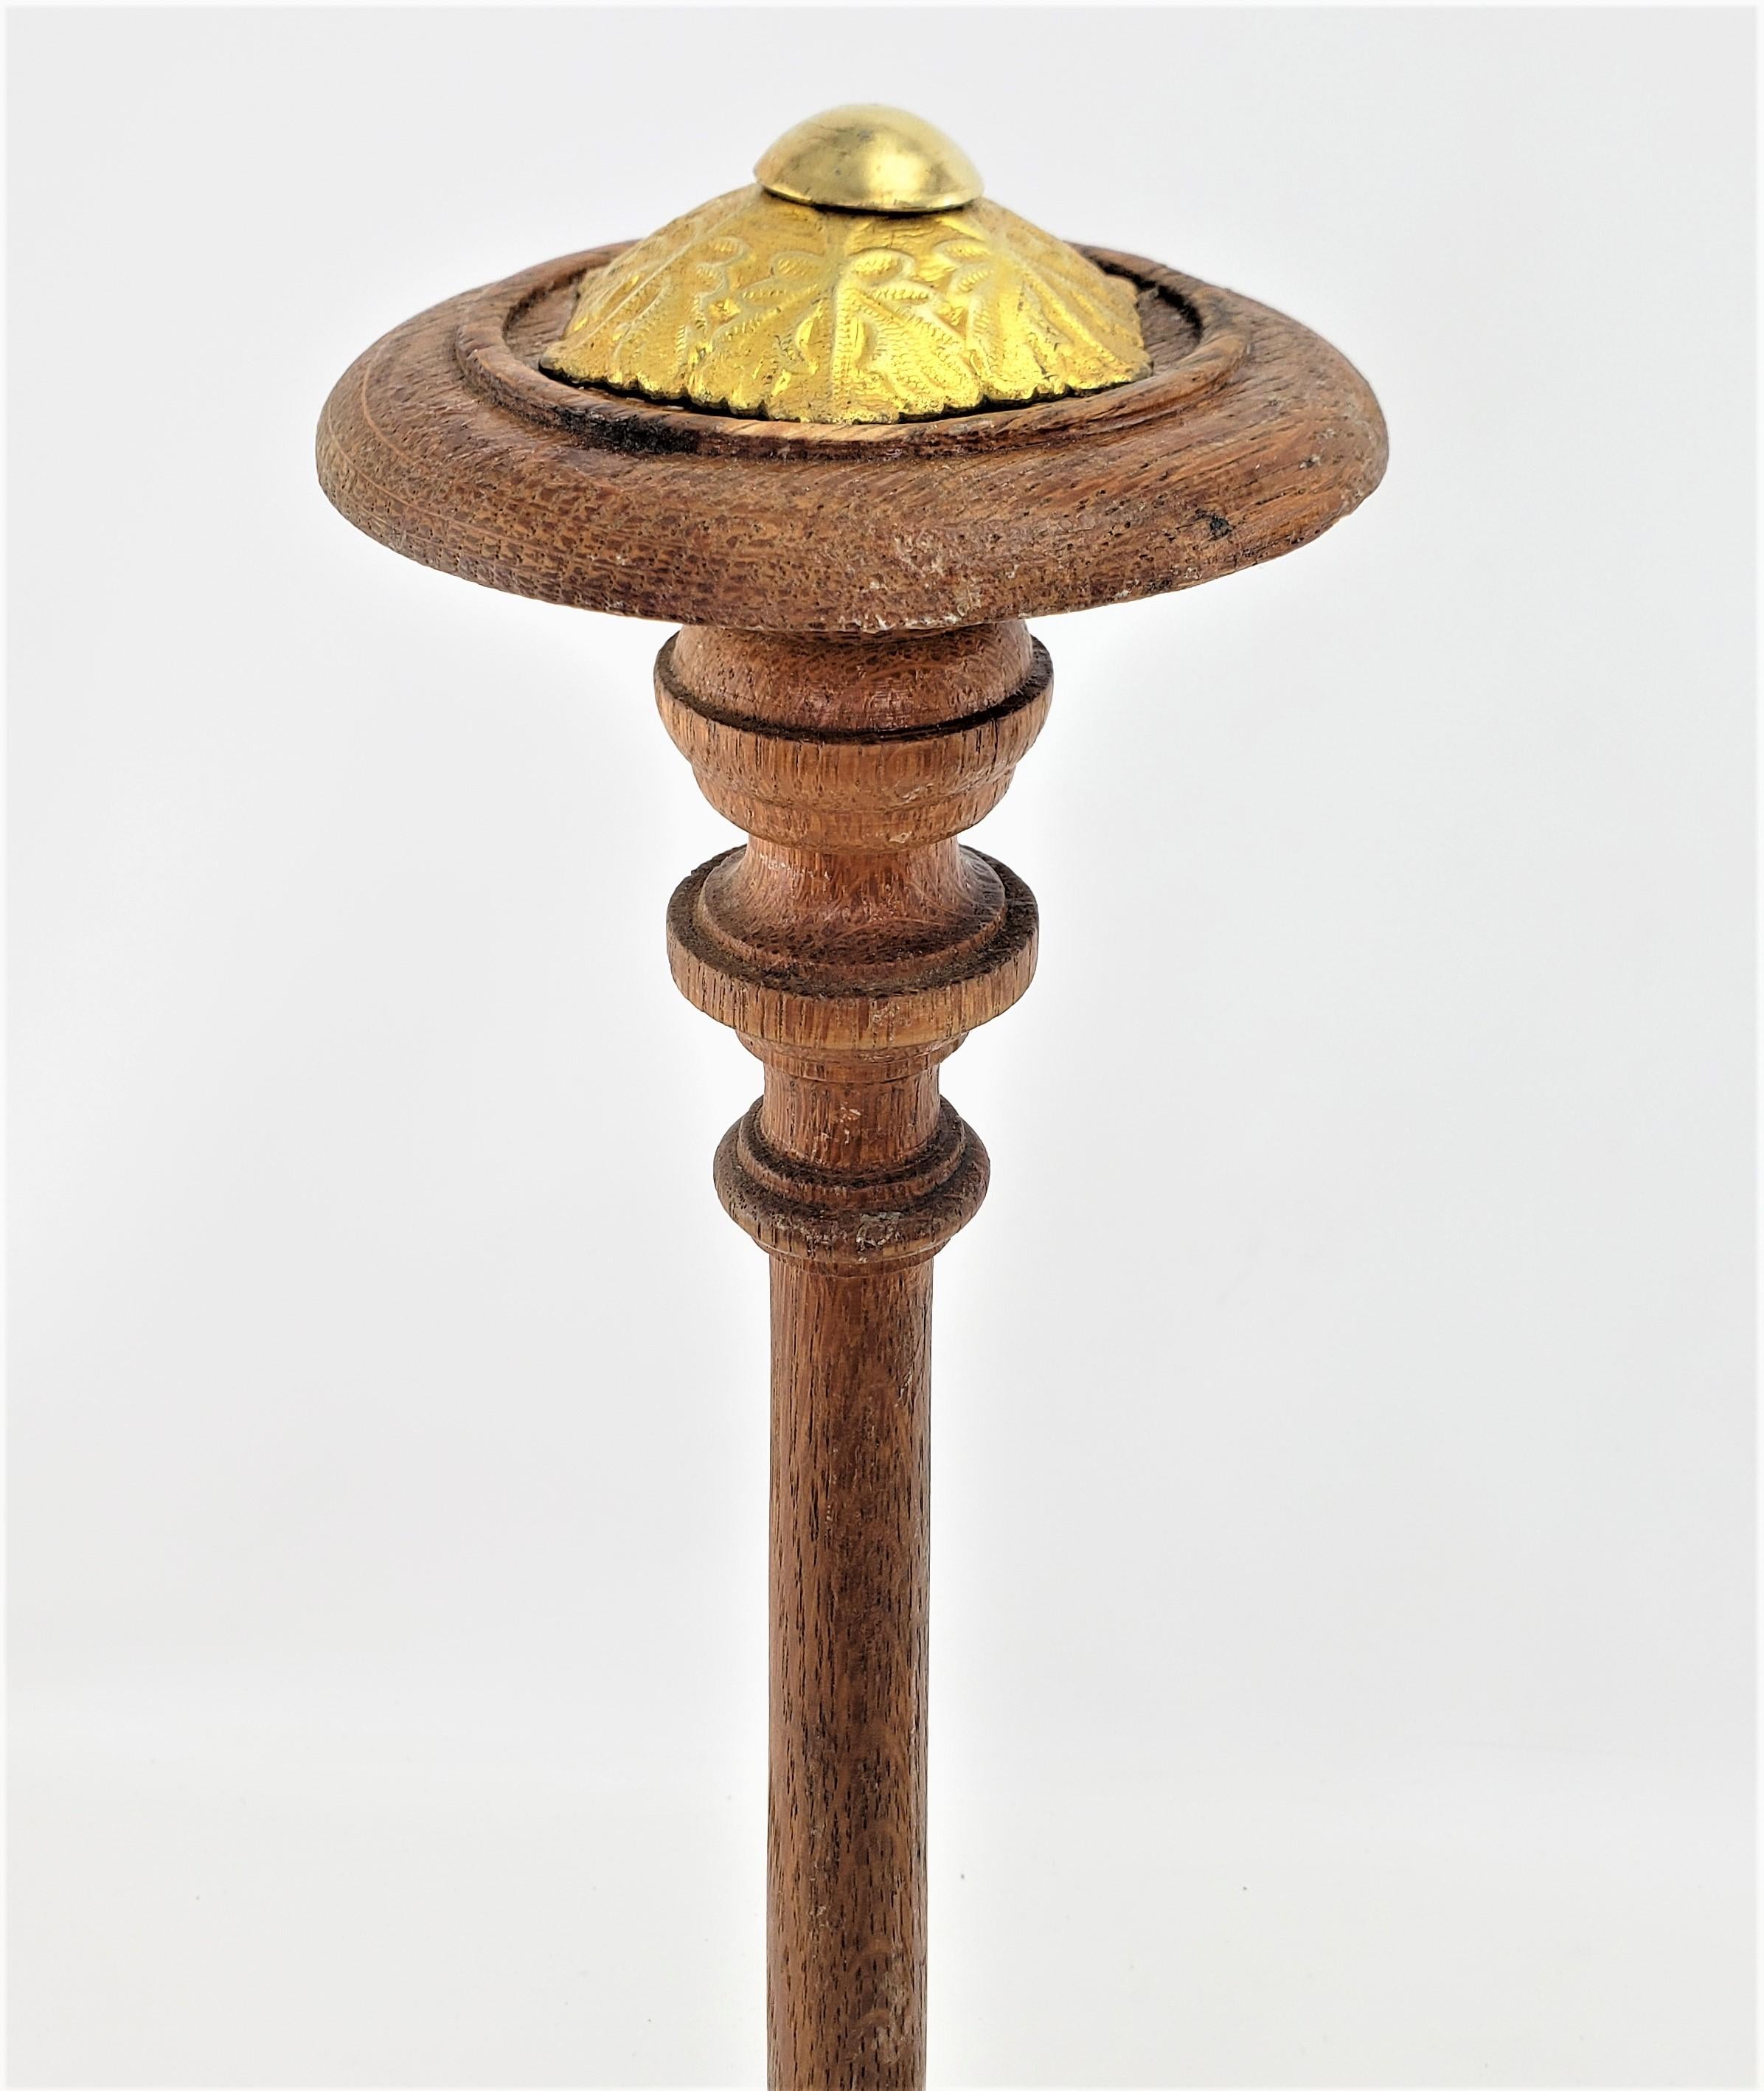 Pair of Antique English Turned Oak Mercantile Hat Stands w/ Engraved Brass Caps In Good Condition For Sale In Hamilton, Ontario